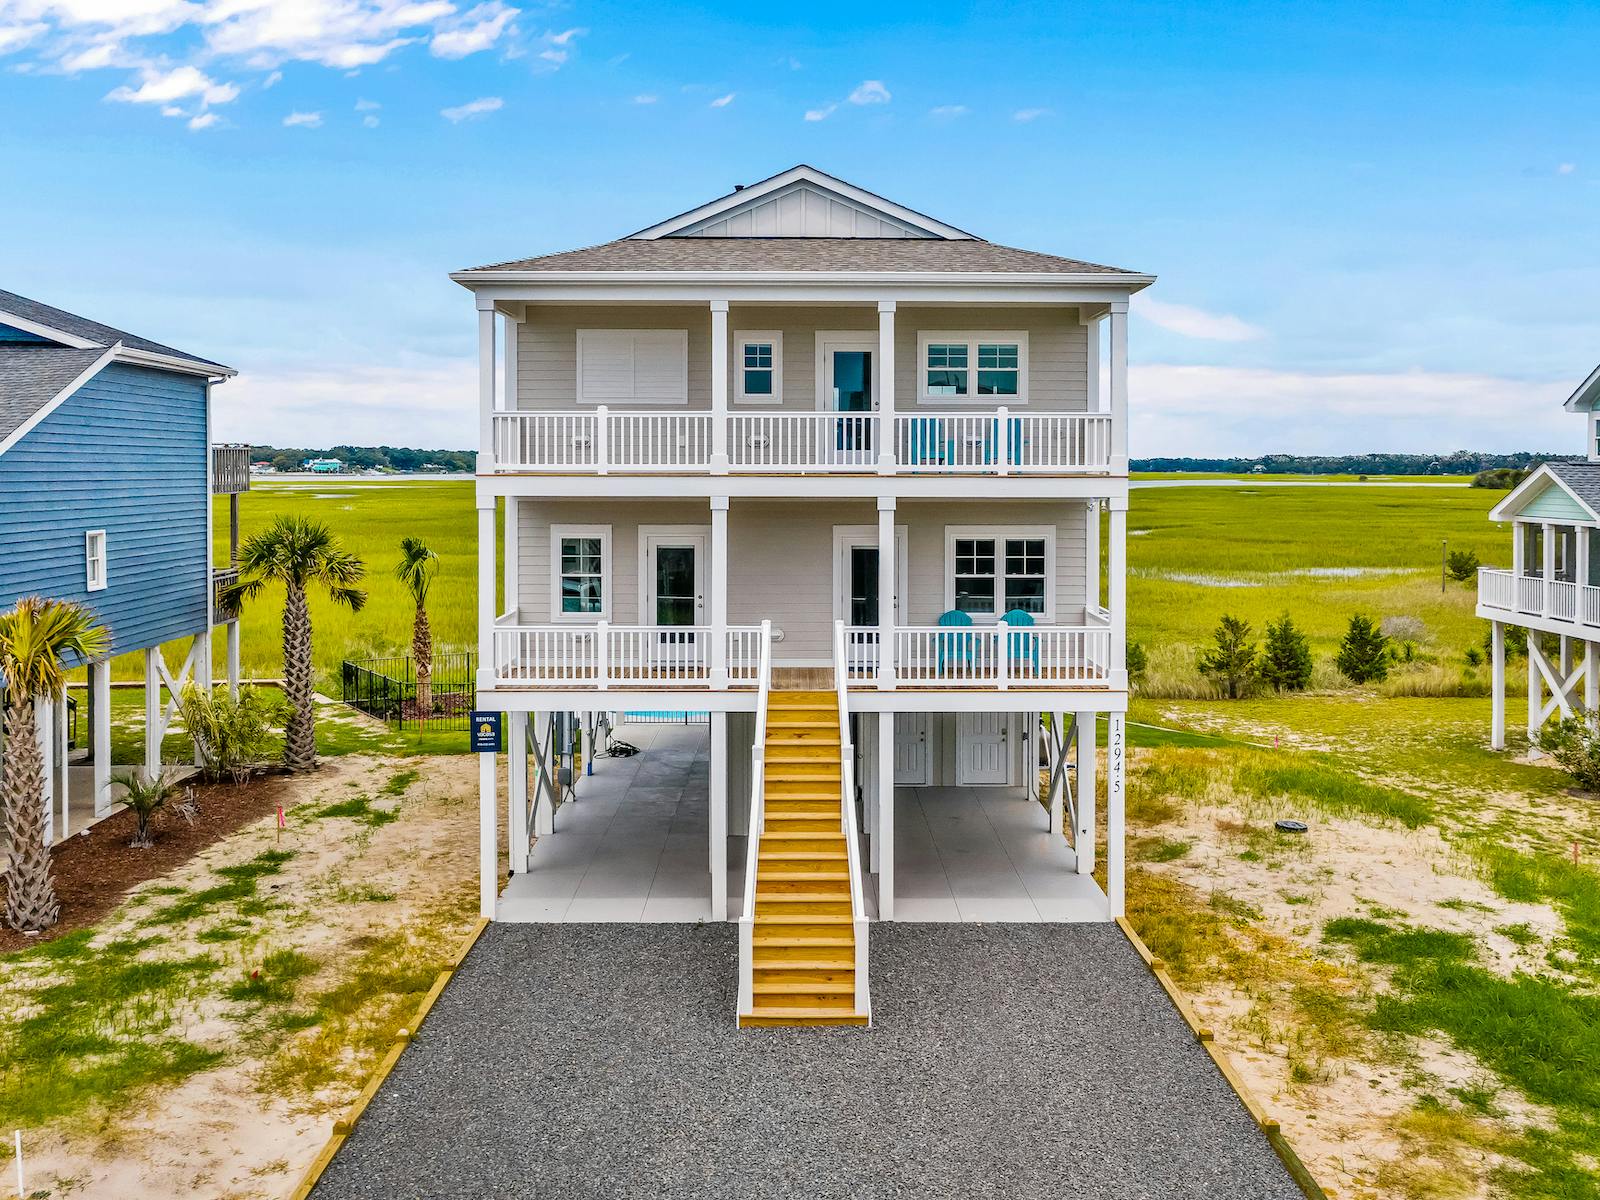 The exterior of a beach home rental in North Carolina.